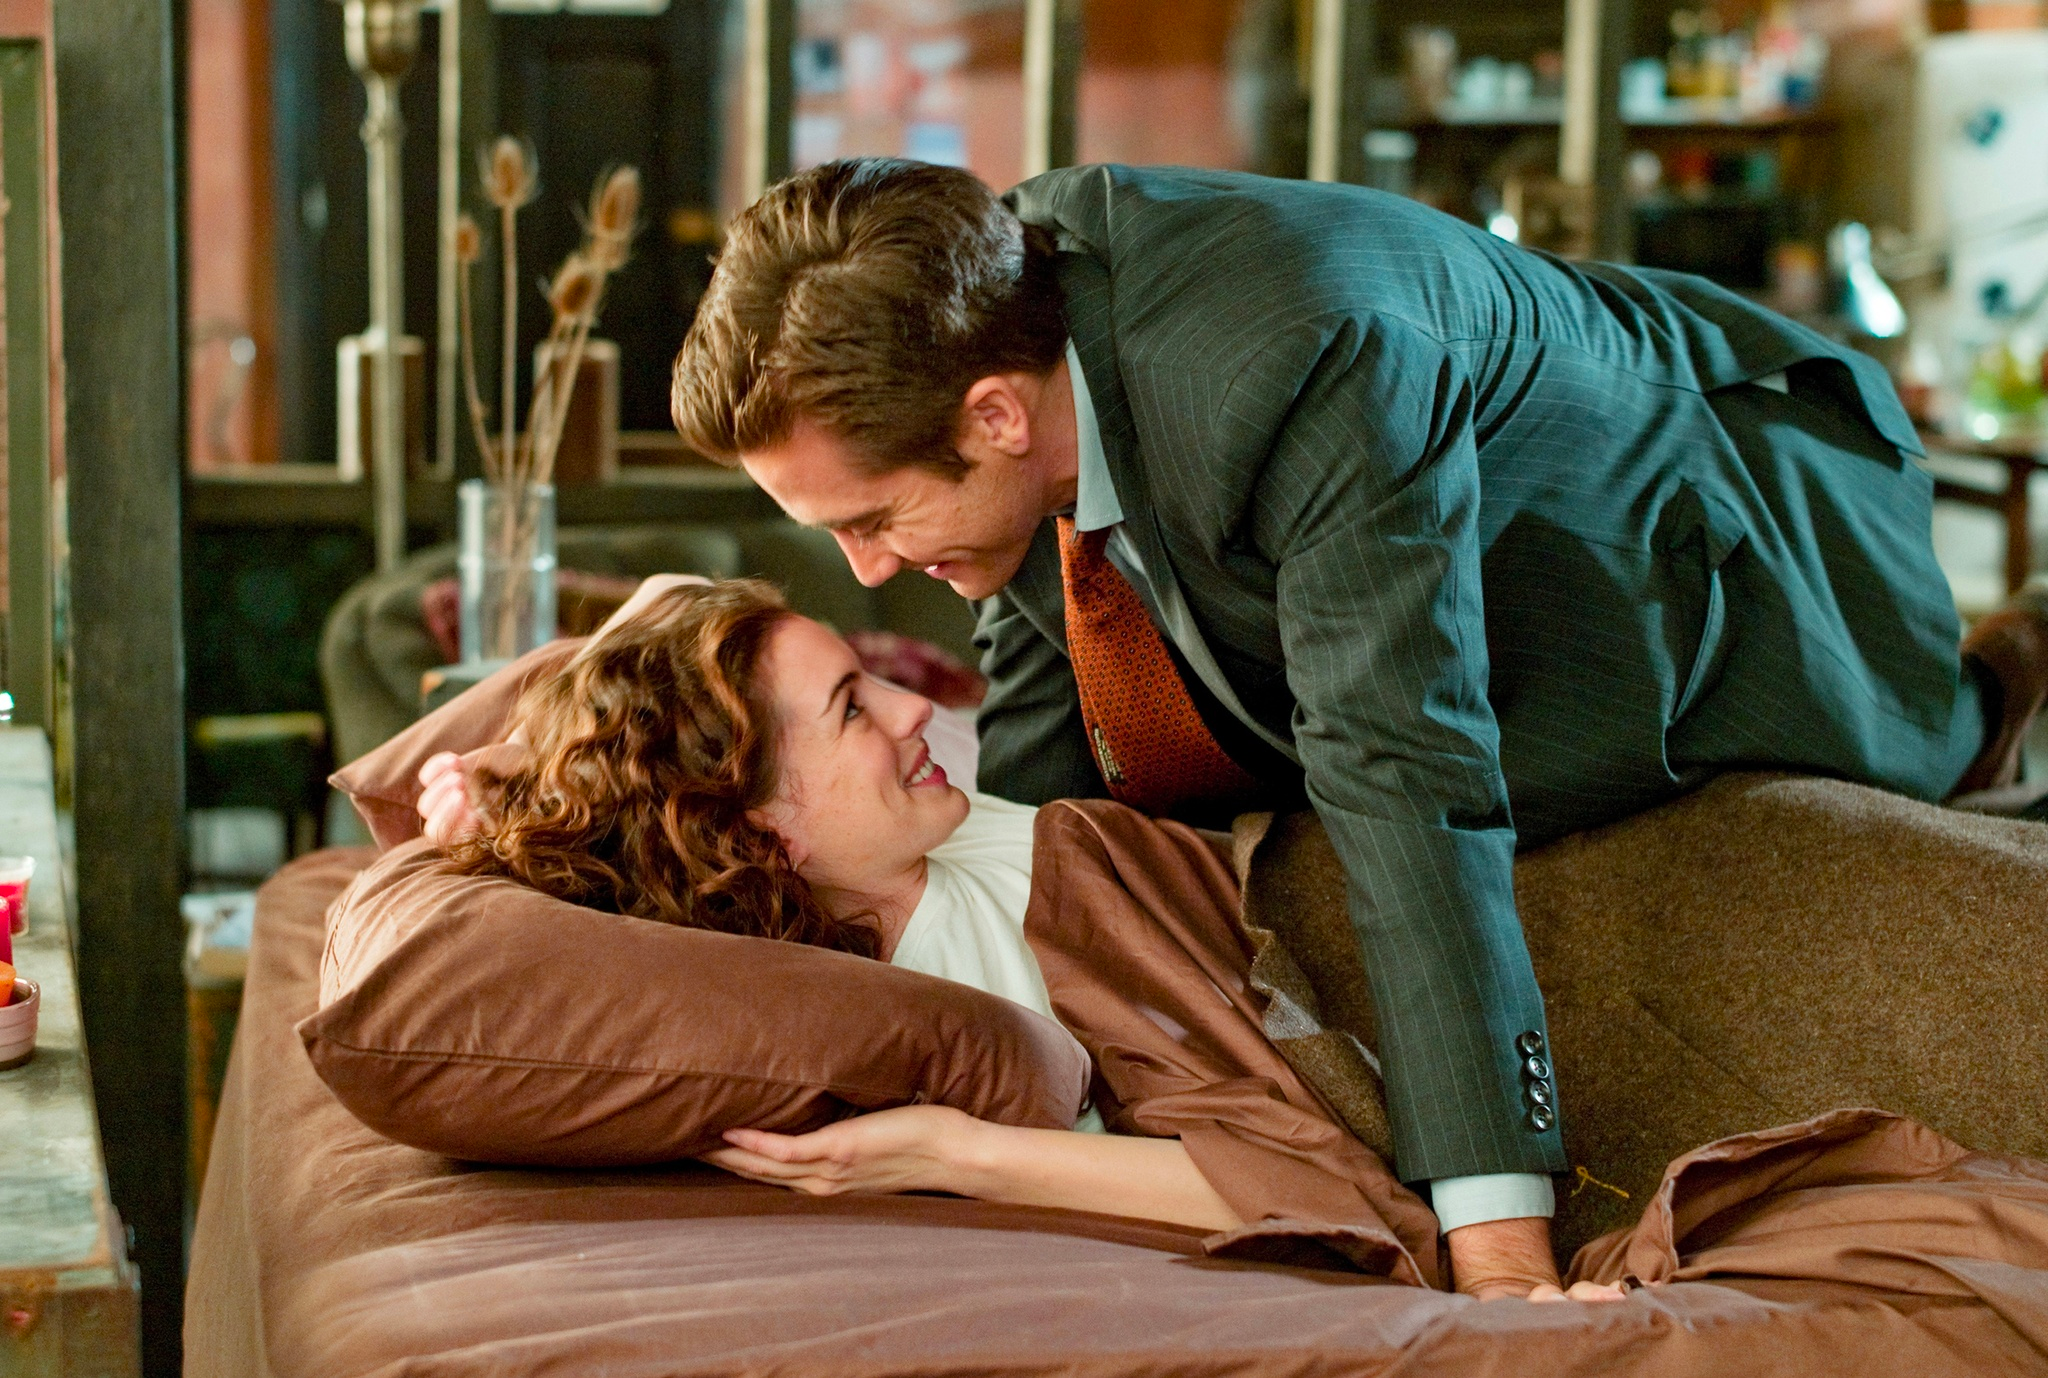 Anne Hathaway and Jake Gyllenhaal are looking at each other in Love and Other Drugs.